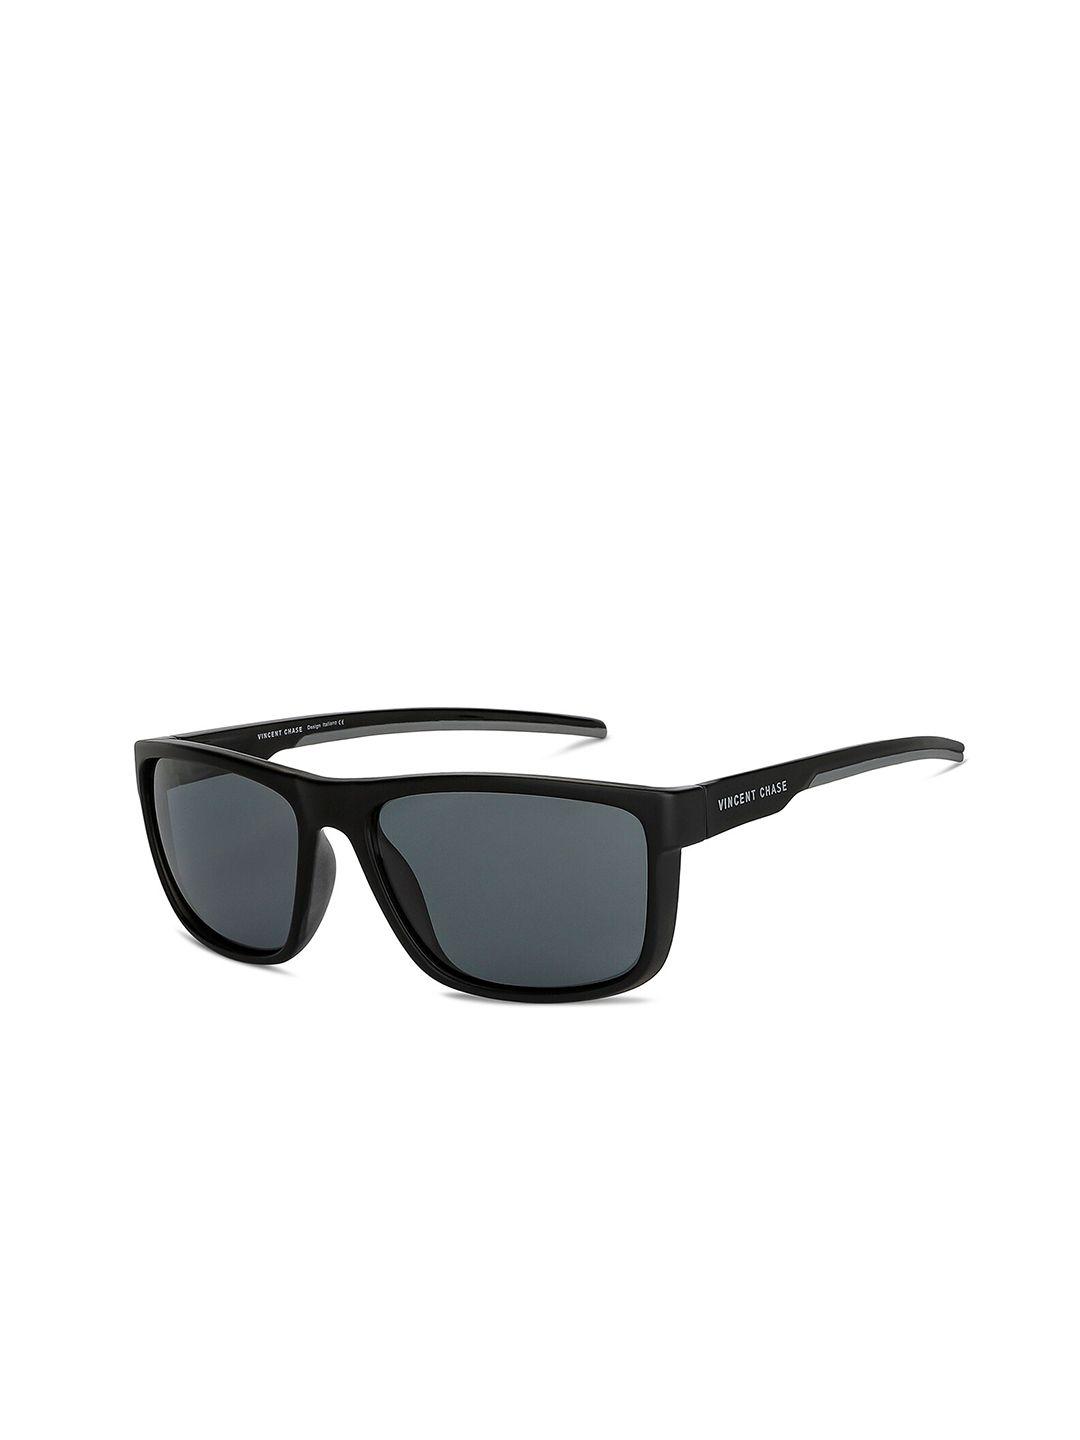 vincent chase unisex grey lens & black sports sunglasses with polarised lens